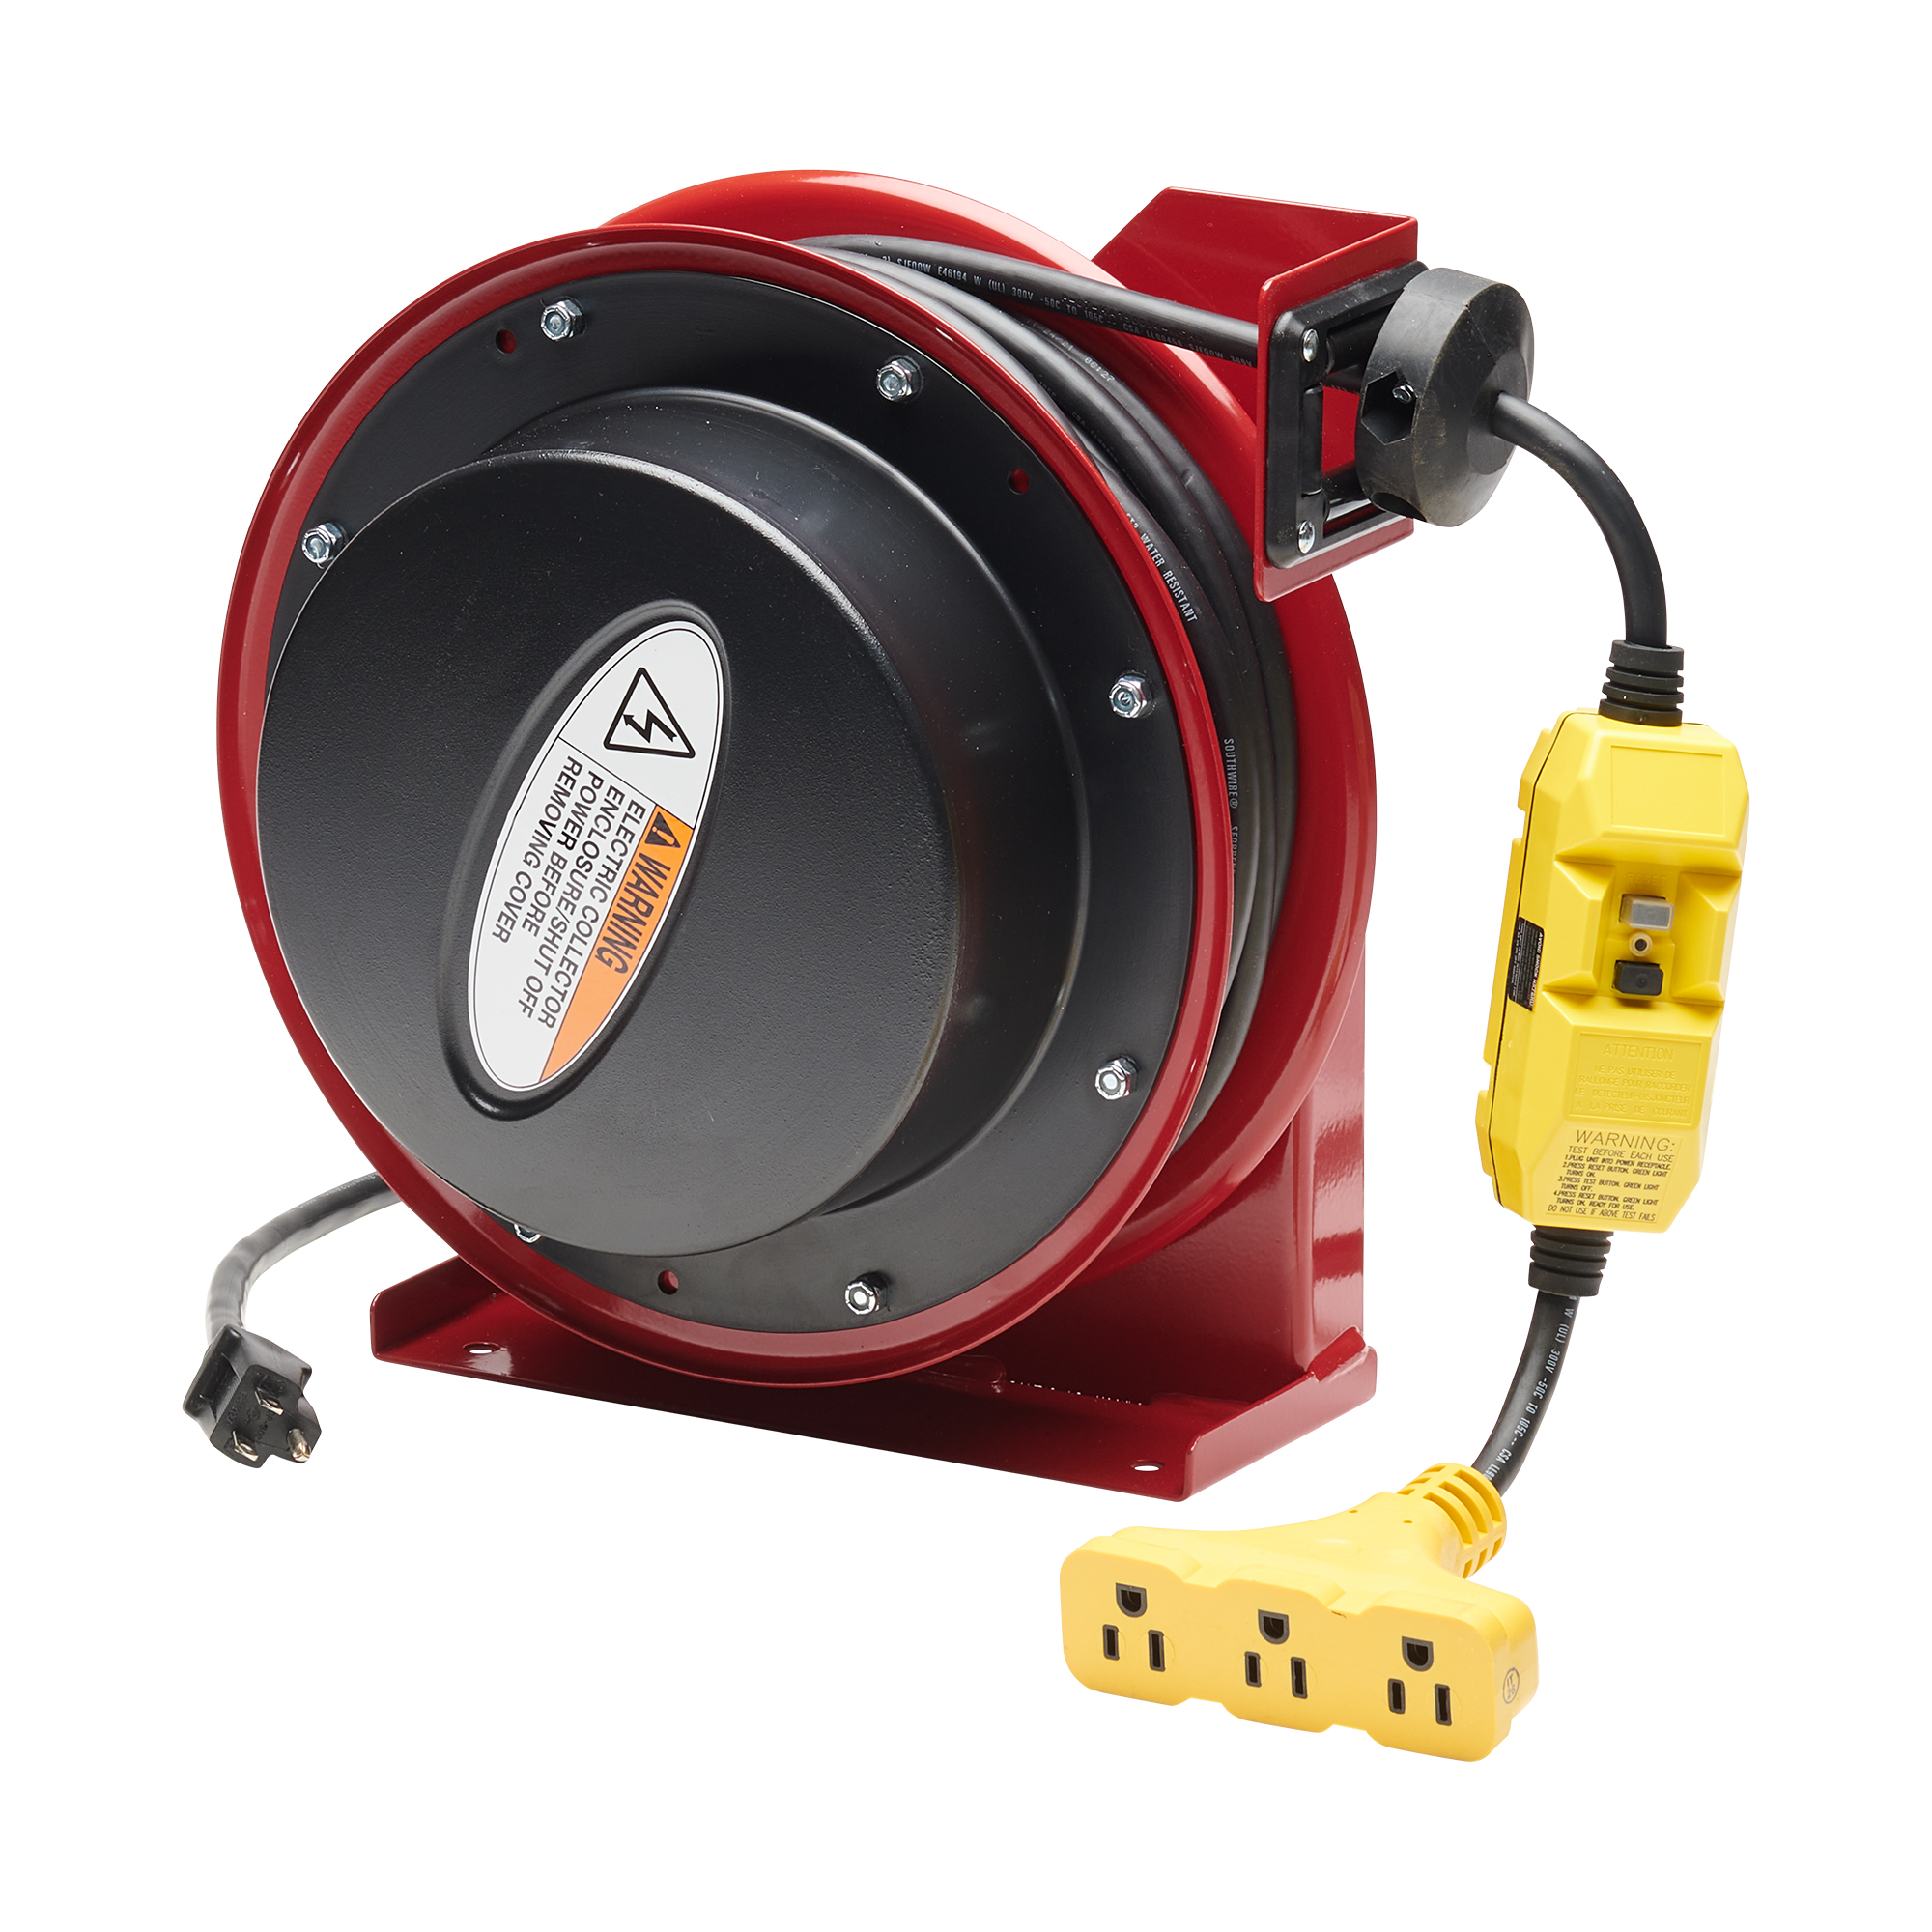 Reelcraft LS 5445 123 9G - 12/3 45 ft. Triple Outlet w/GFCI Power Cord Reel